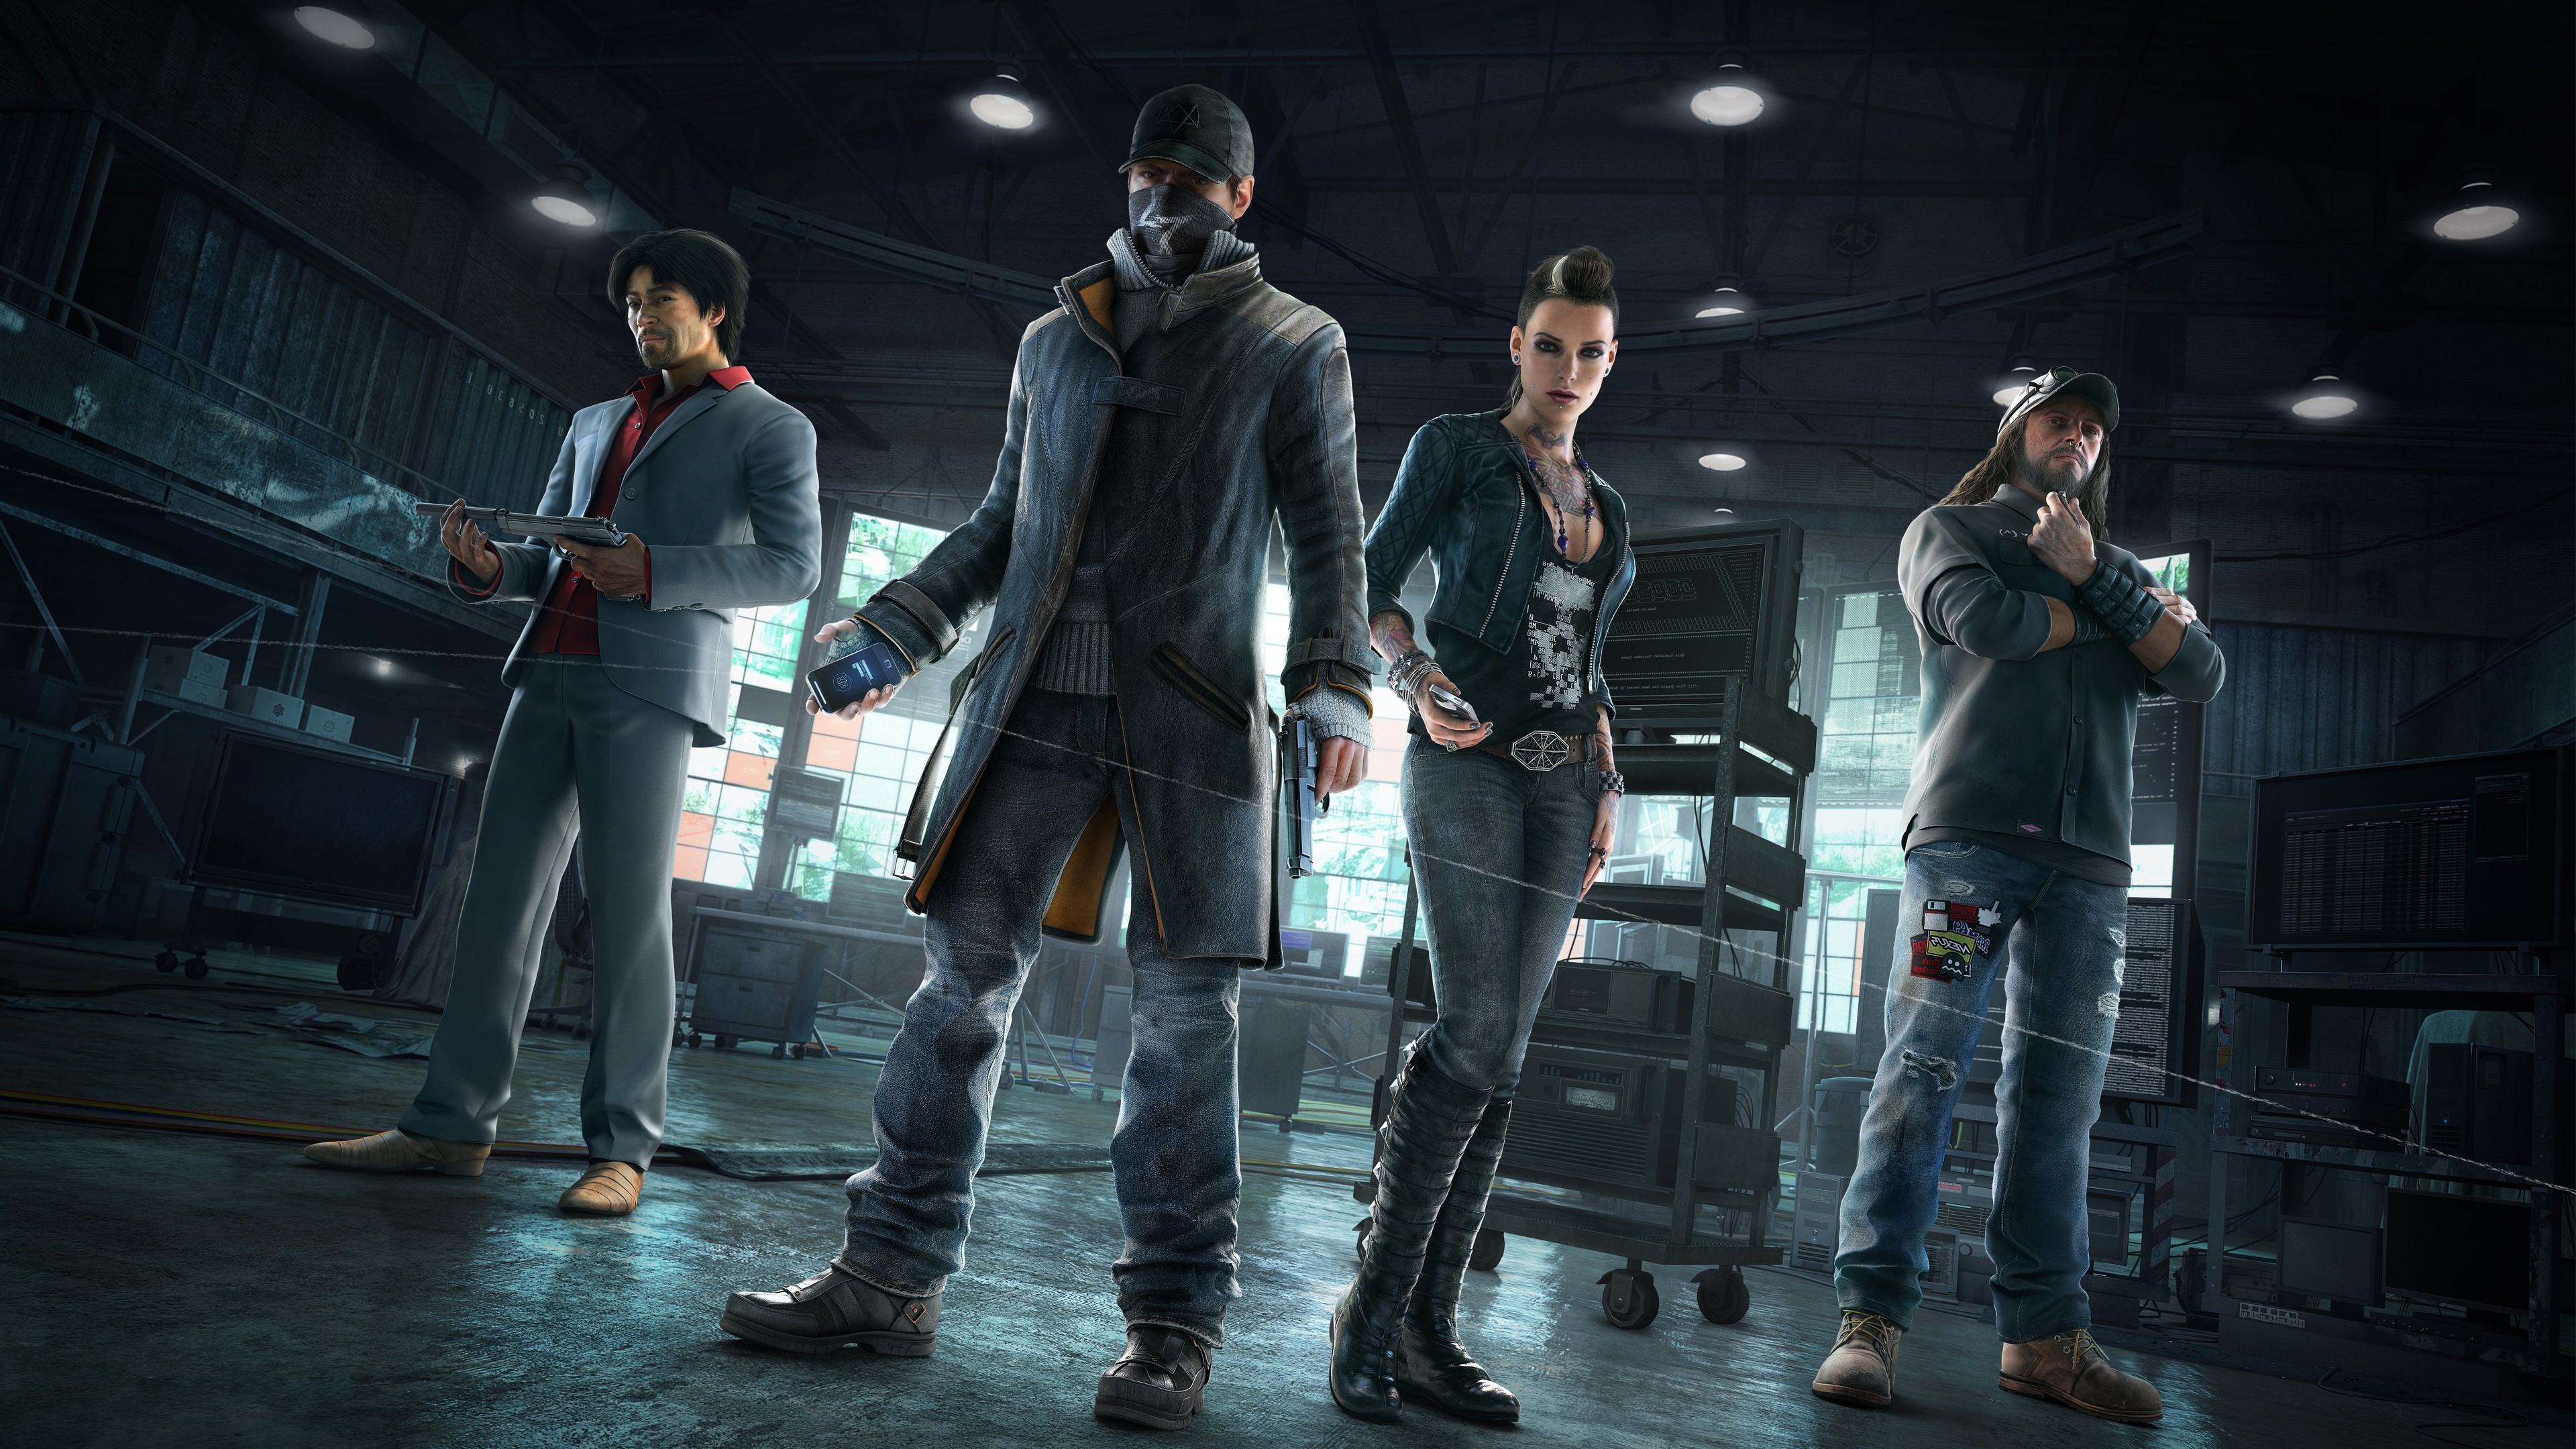 3840x2160 Watch Dogs 2 Video Game Wallpaper 62012